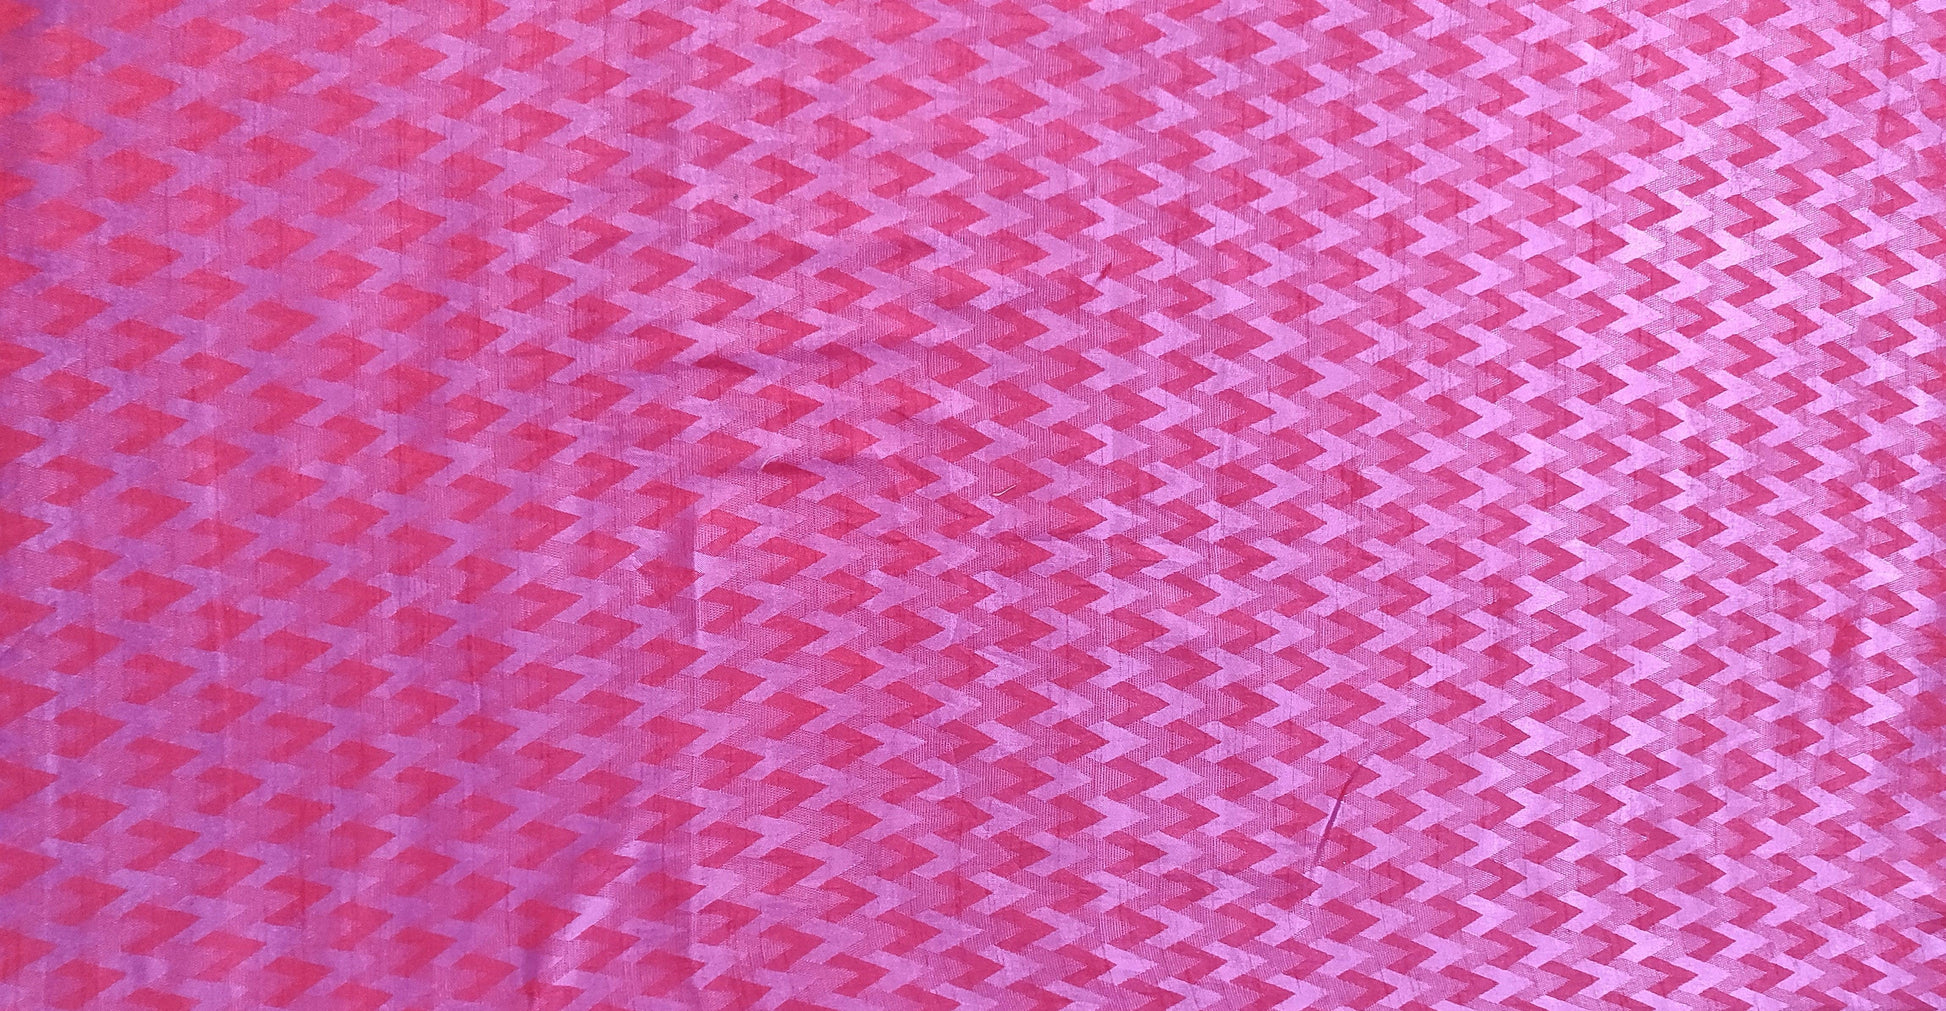 Jeqaurd Weaven Pink Fabric for Blouse Crop Top Pre Cut 1 Meter FAB74-Anvi Creations-Fabric